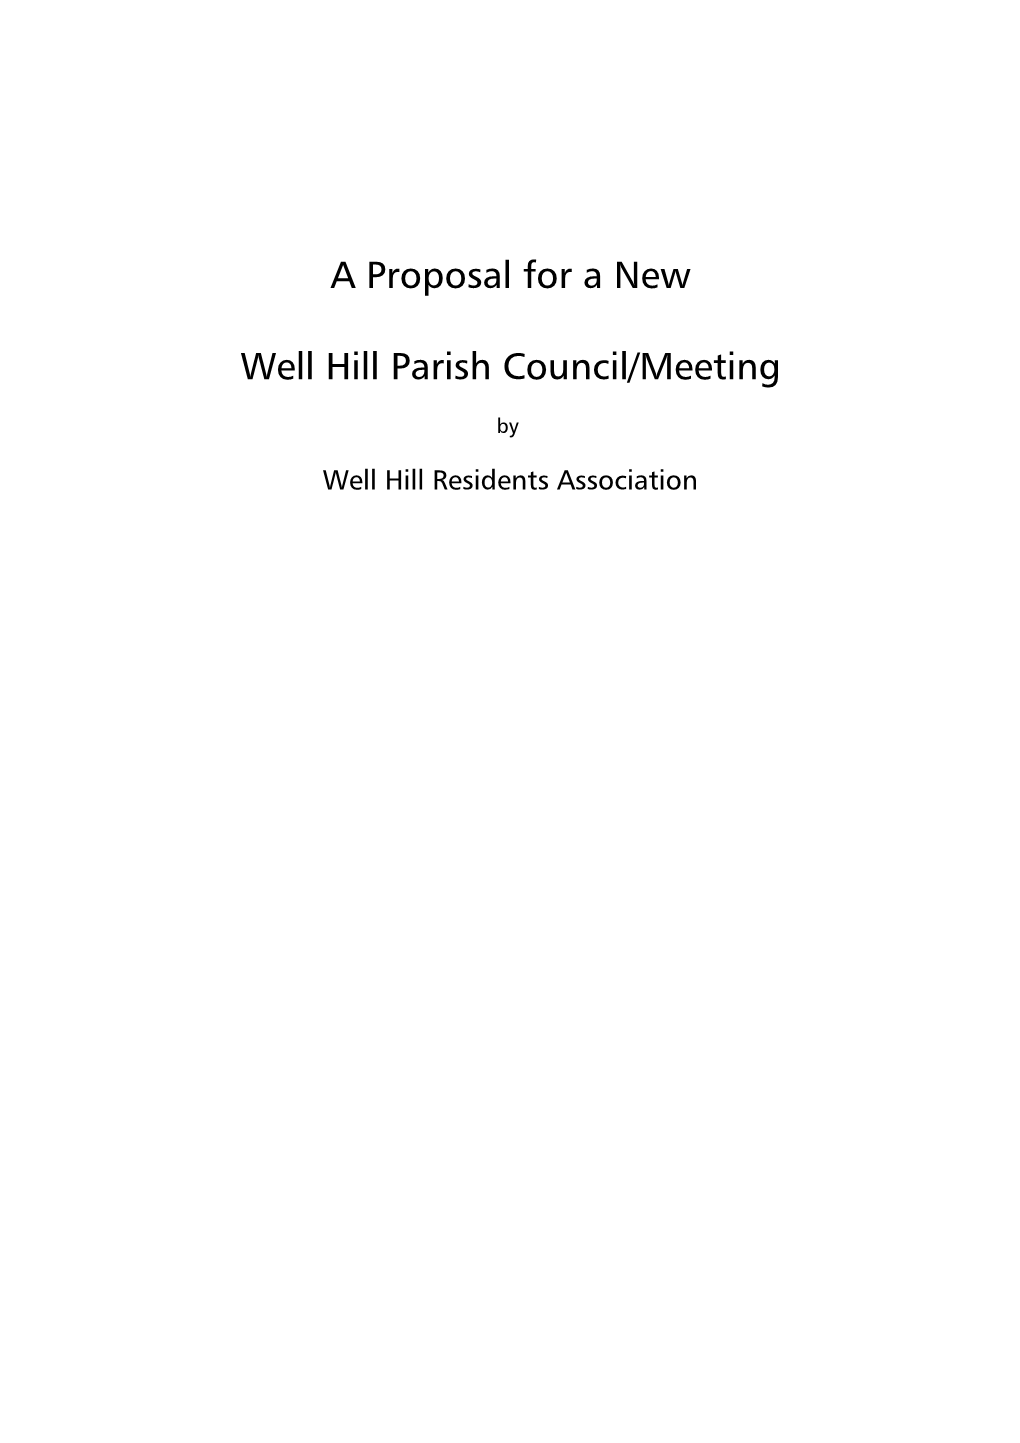 A Proposal for a New Well Hill Parish Council/Meeting Contents